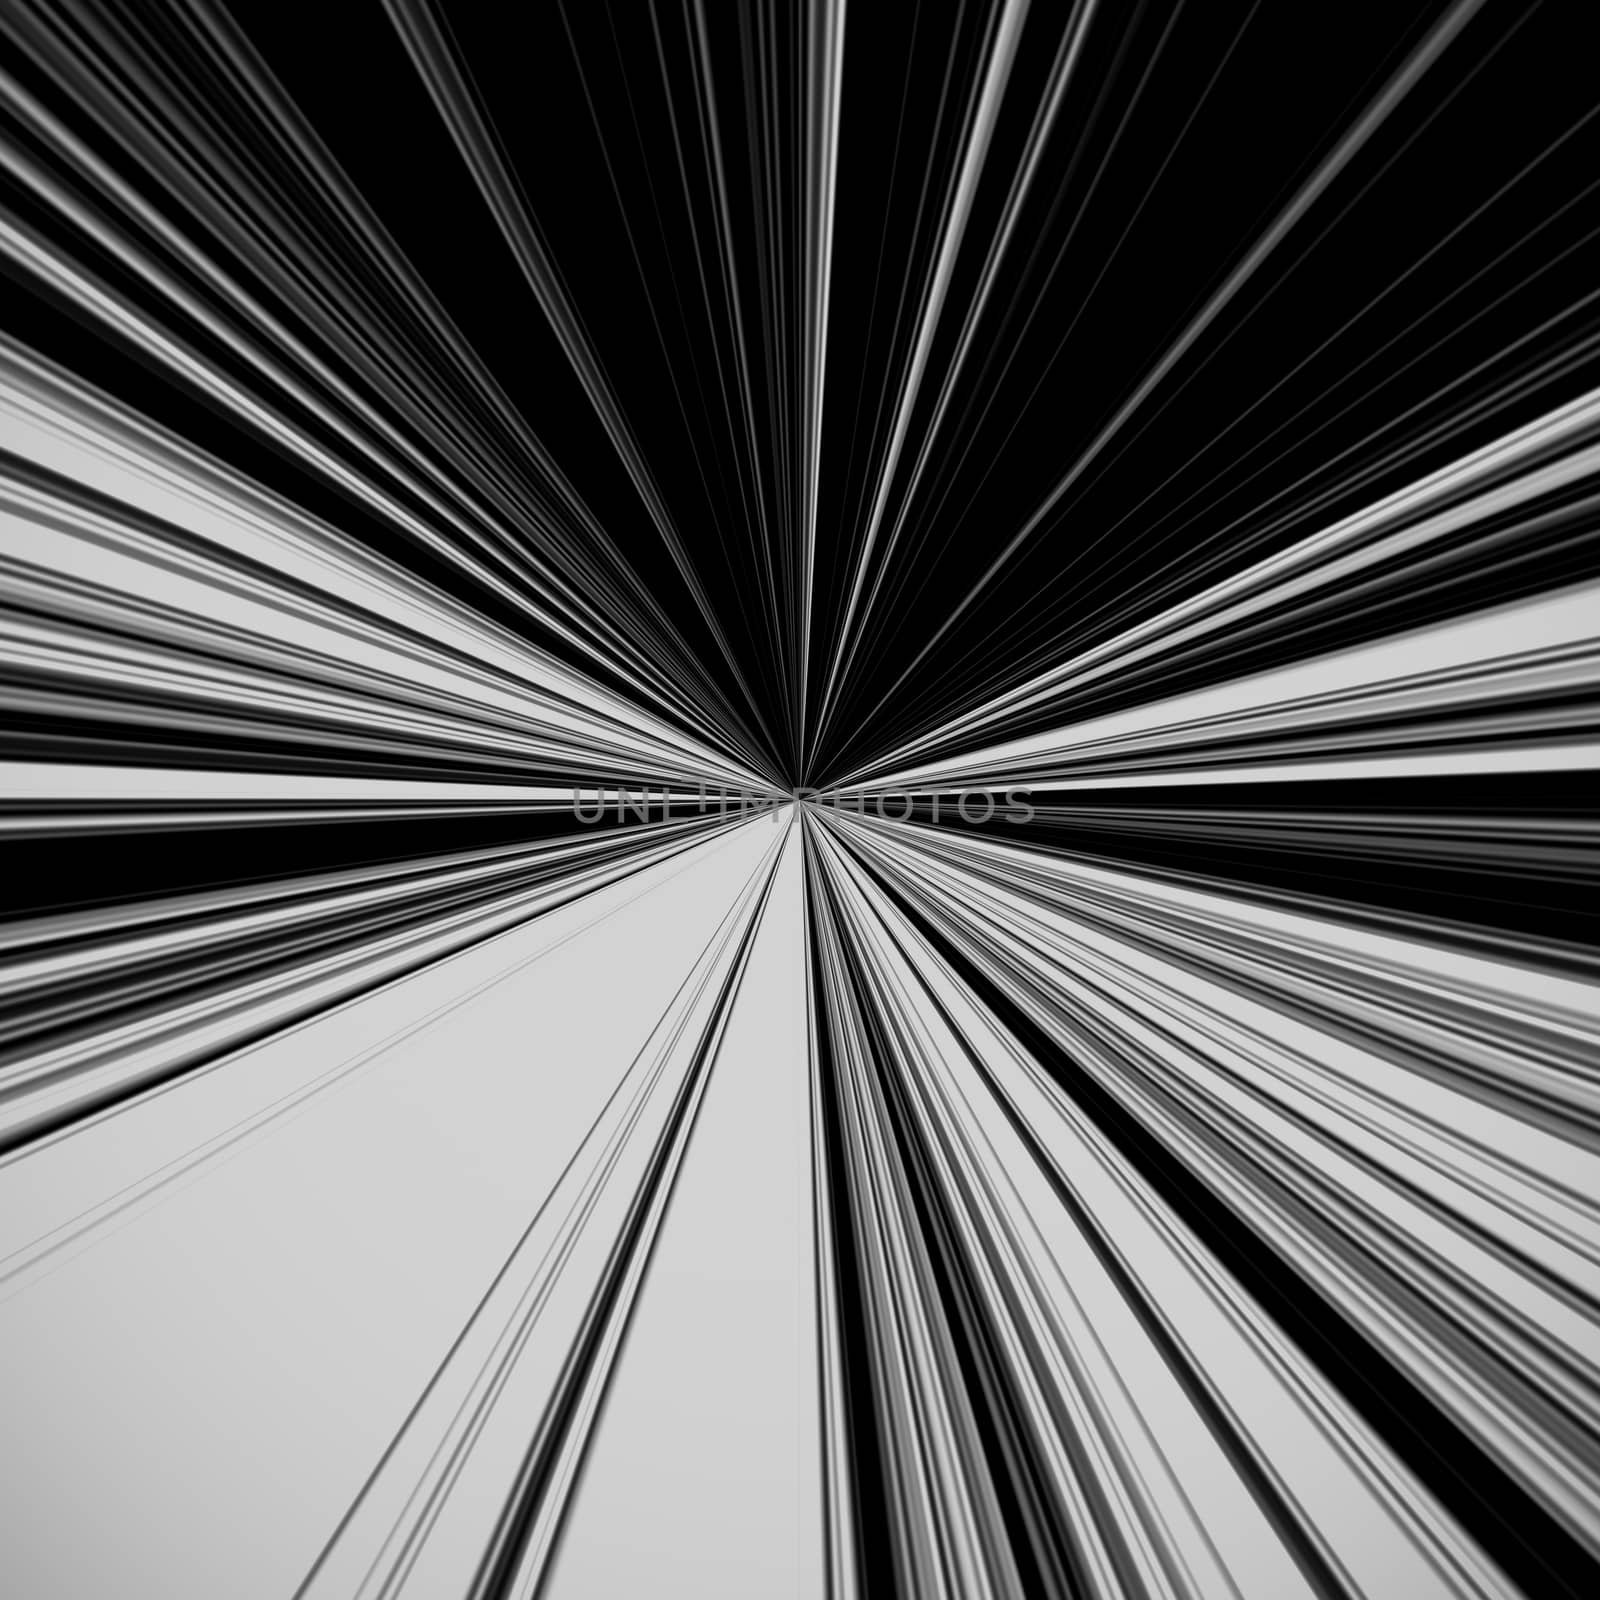 Beautiful abstract starburst background, black and white by a3701027